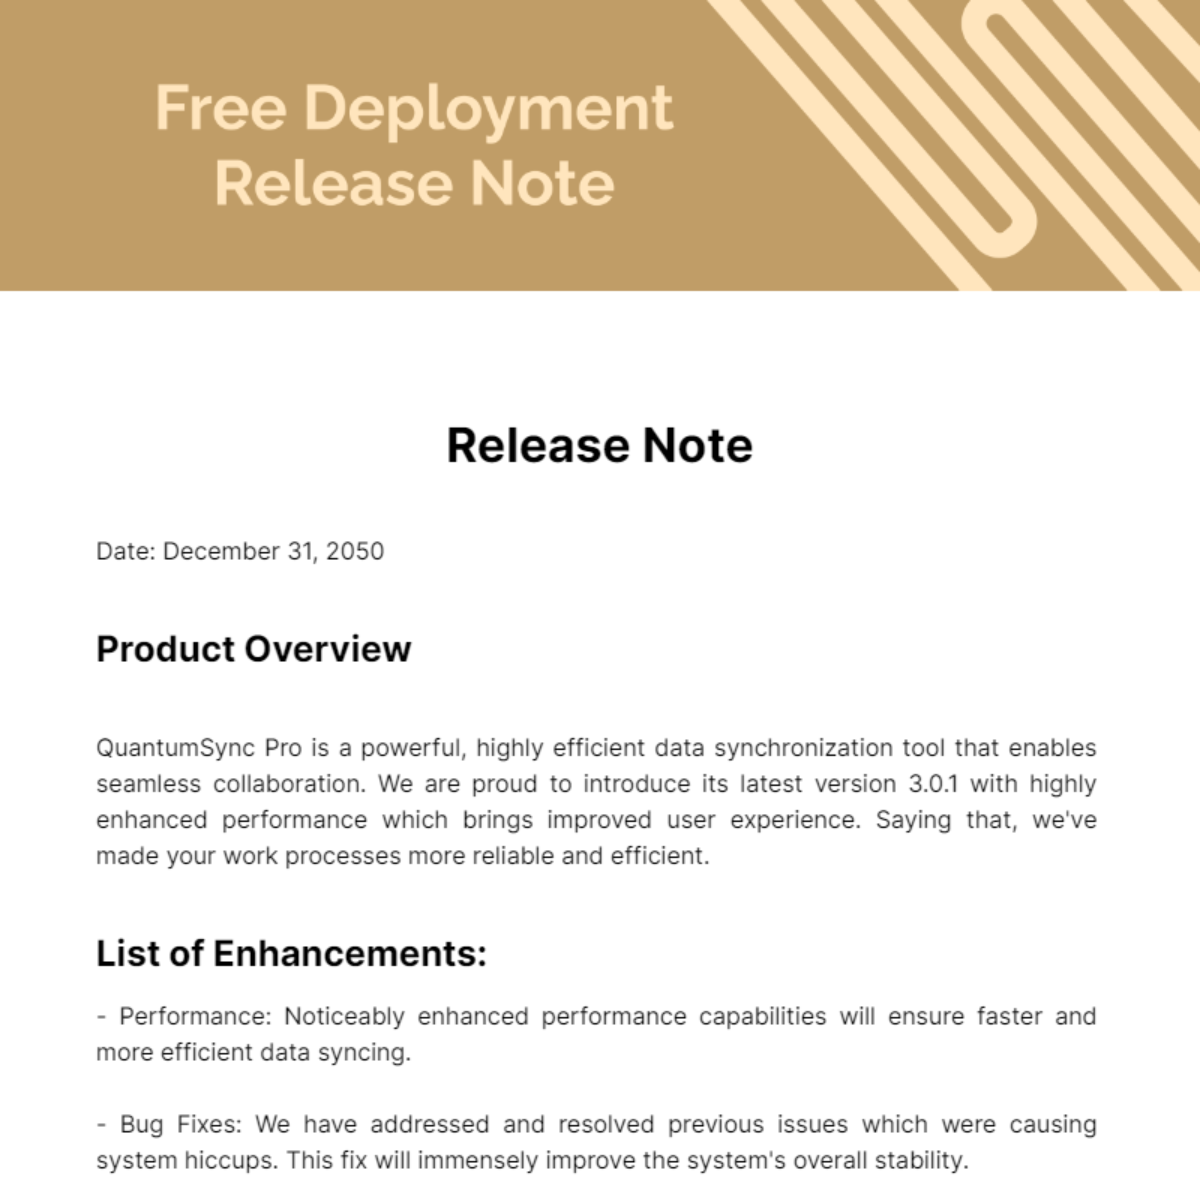 Deployment Release Note Template